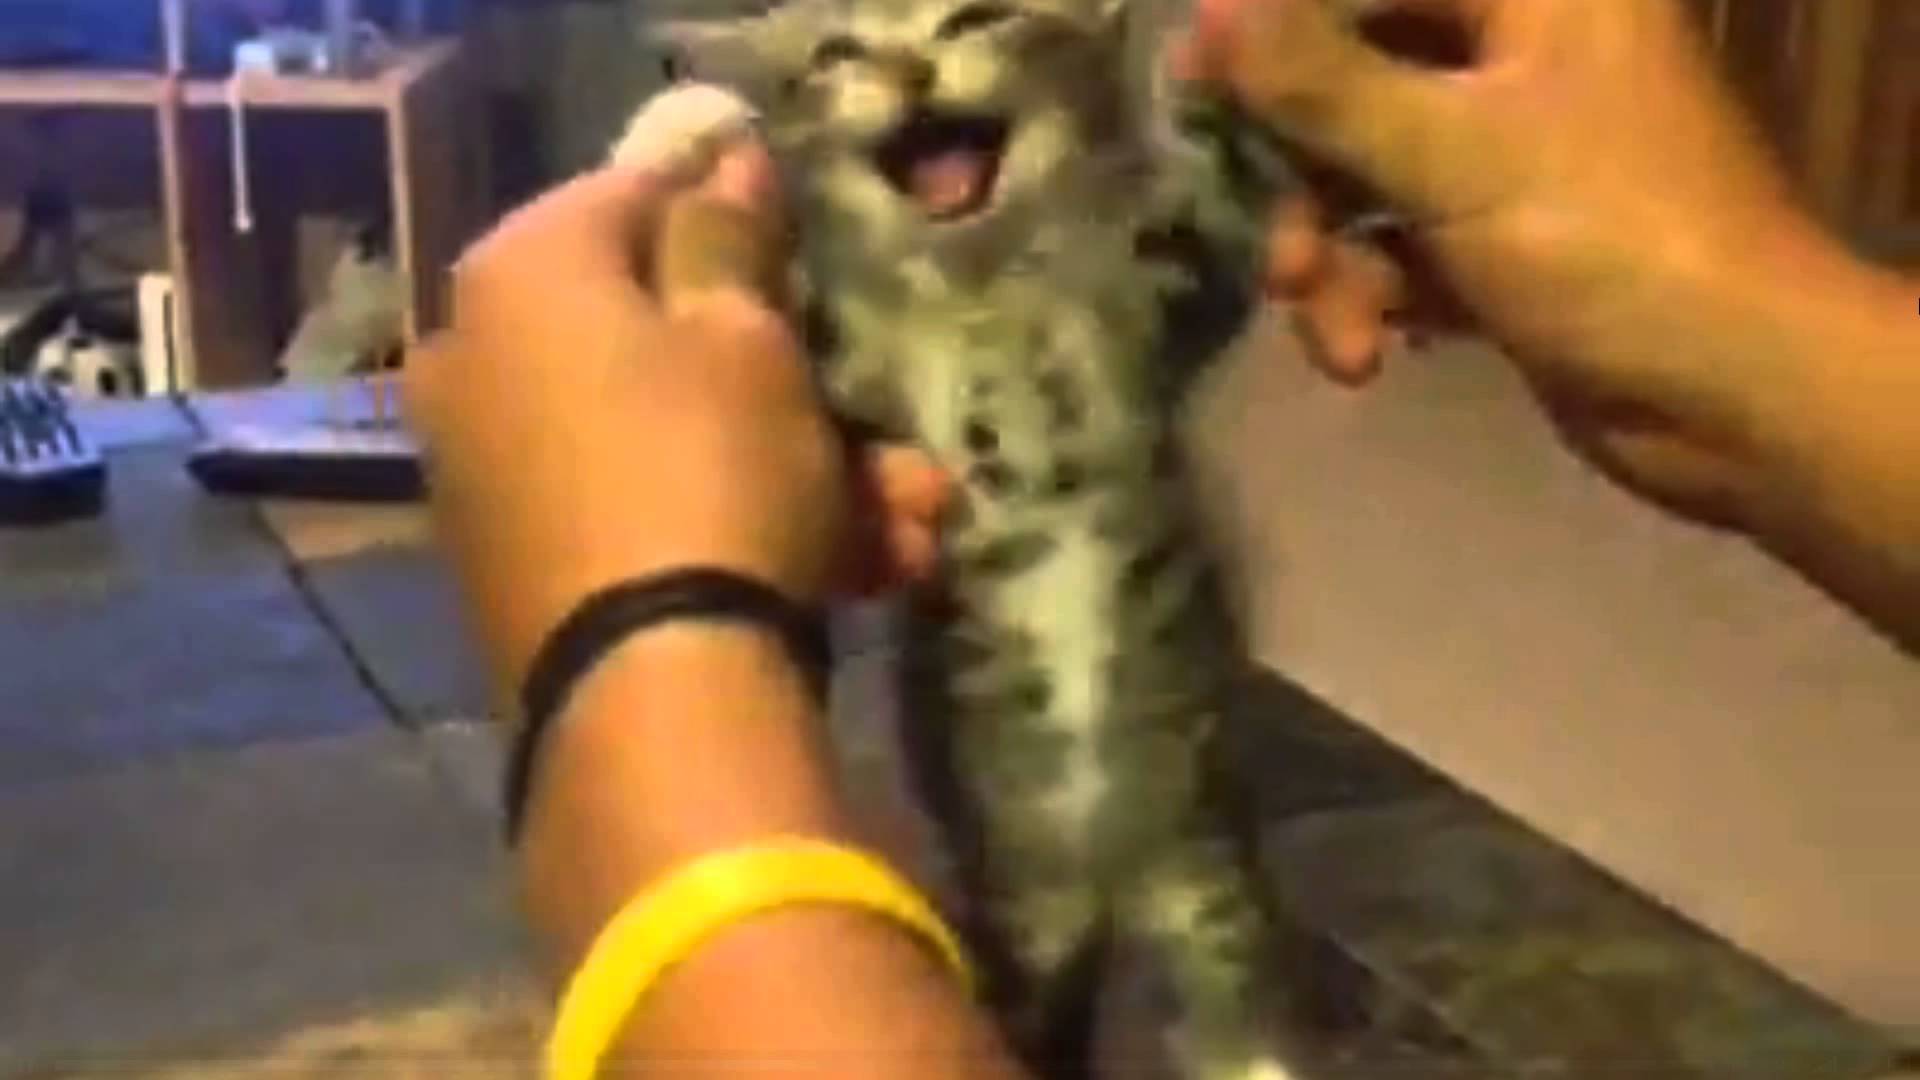 Kitten Dancing to Get Silly - YouTube